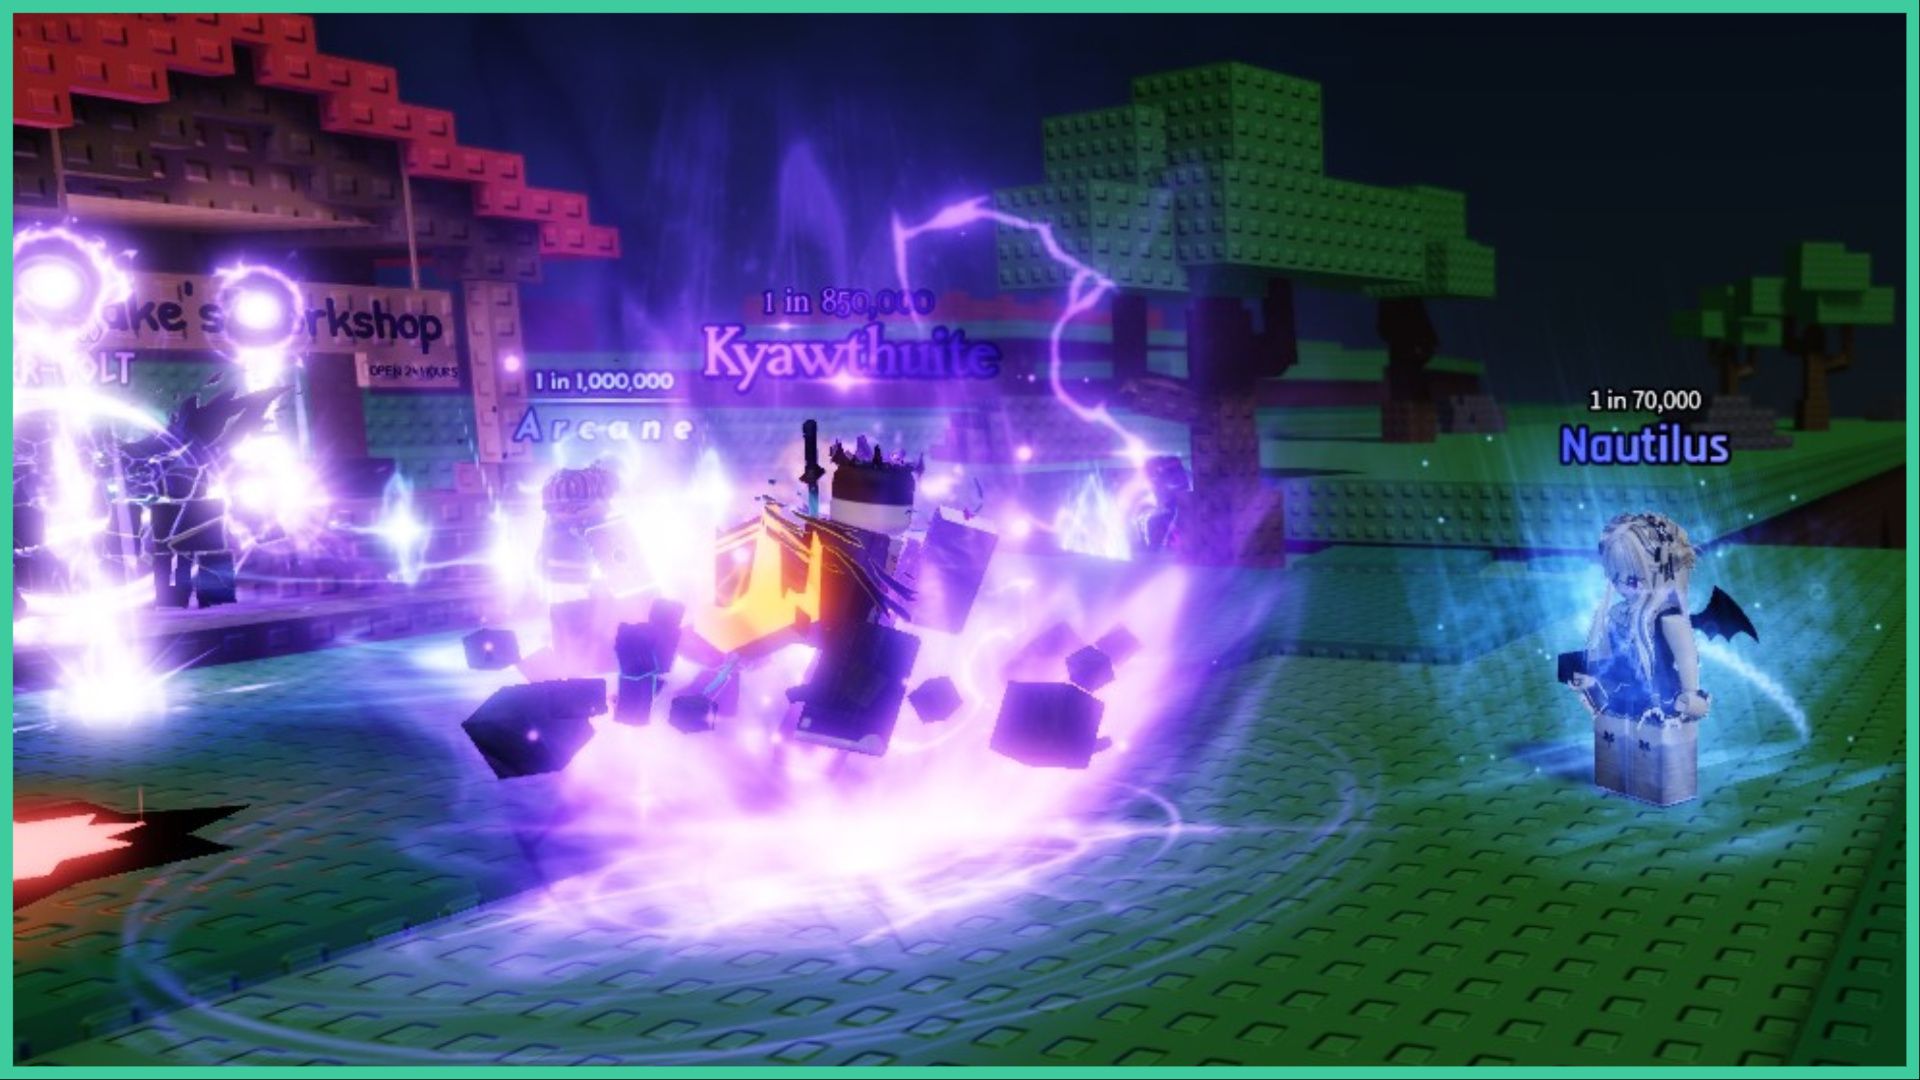 feature image for our sols rng gravitational device guide, the image is a screenshot from the main area of the game next to jake's workshop stall, as players are equipped with glowing auras with electric orbs and electric bolts